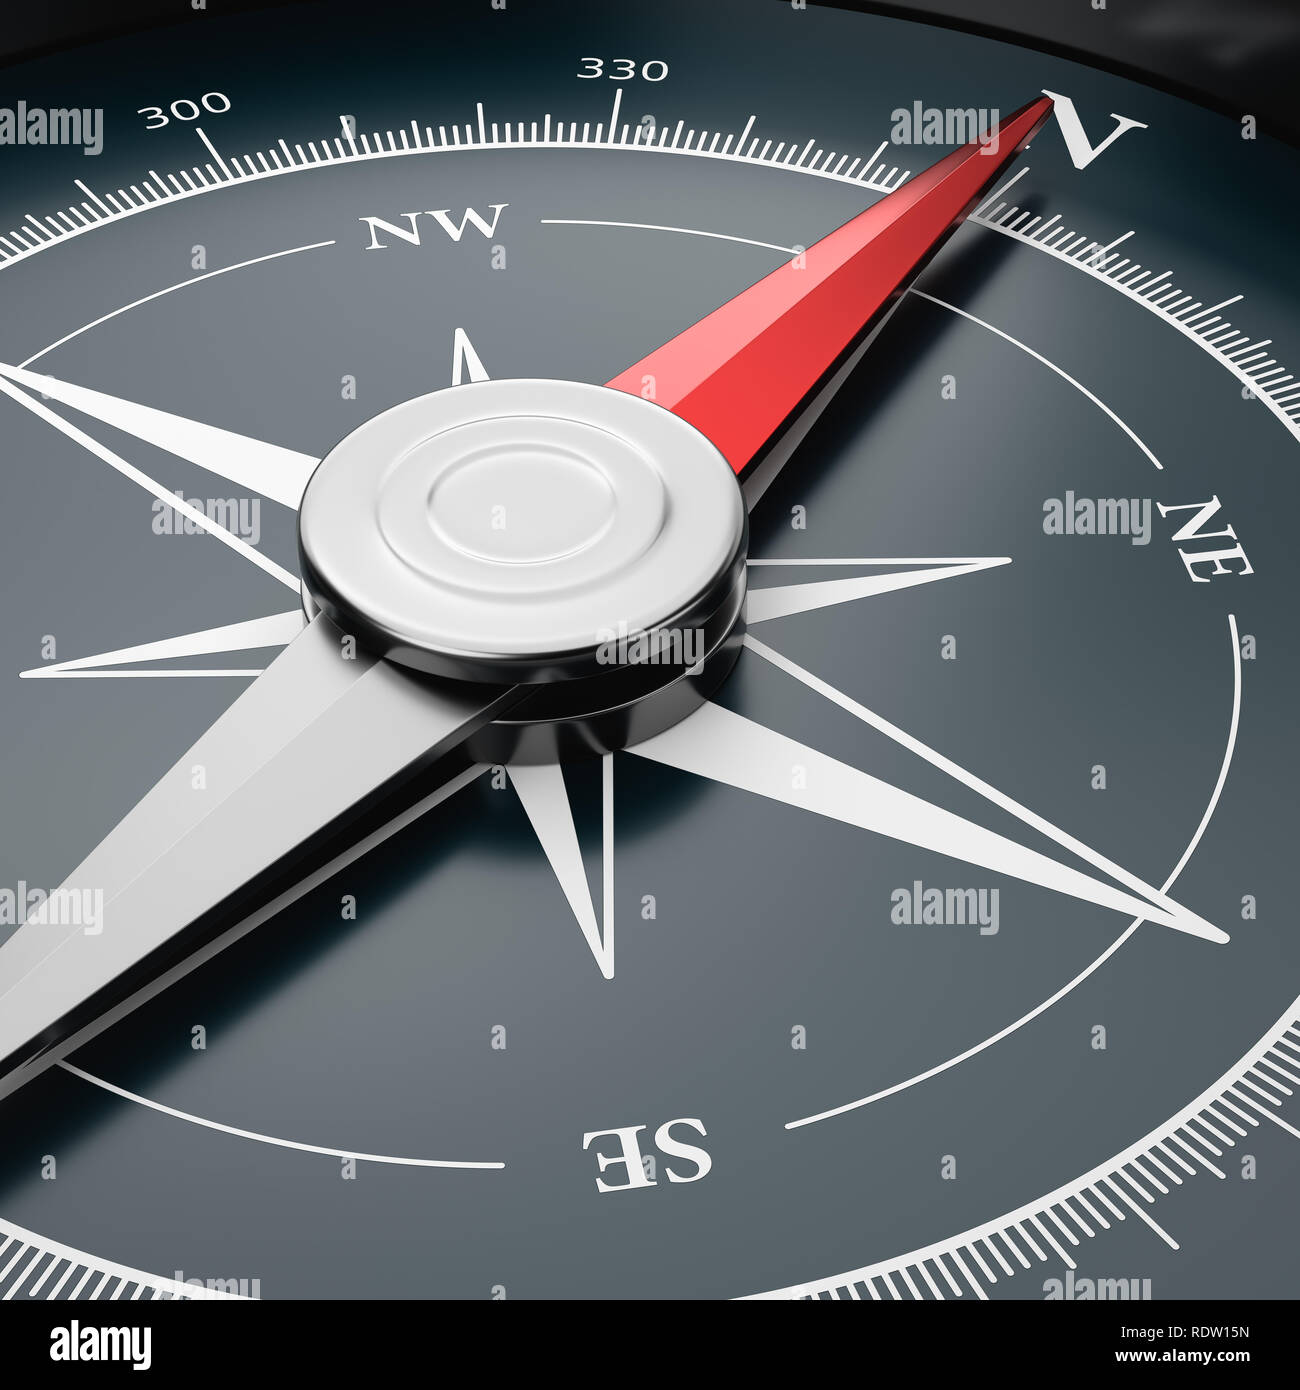 Metallic Compass with Red Magnetic Needle Pointing Toward the North  Close-up 3D Illustration Stock Photo - Alamy